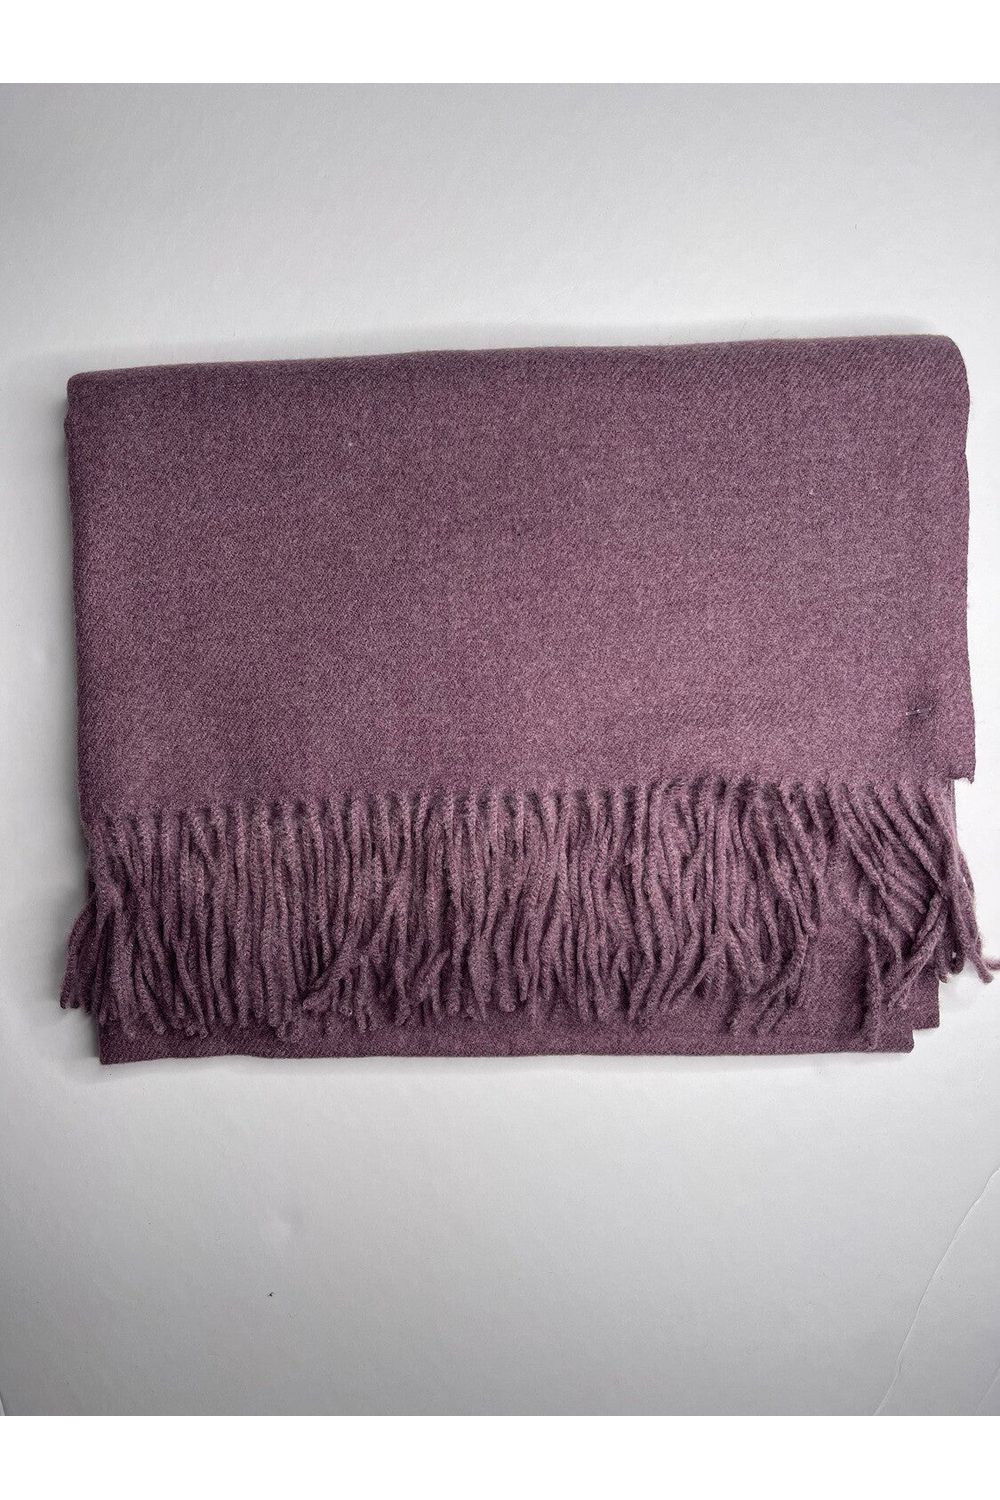 Large, very soft and warm scarf